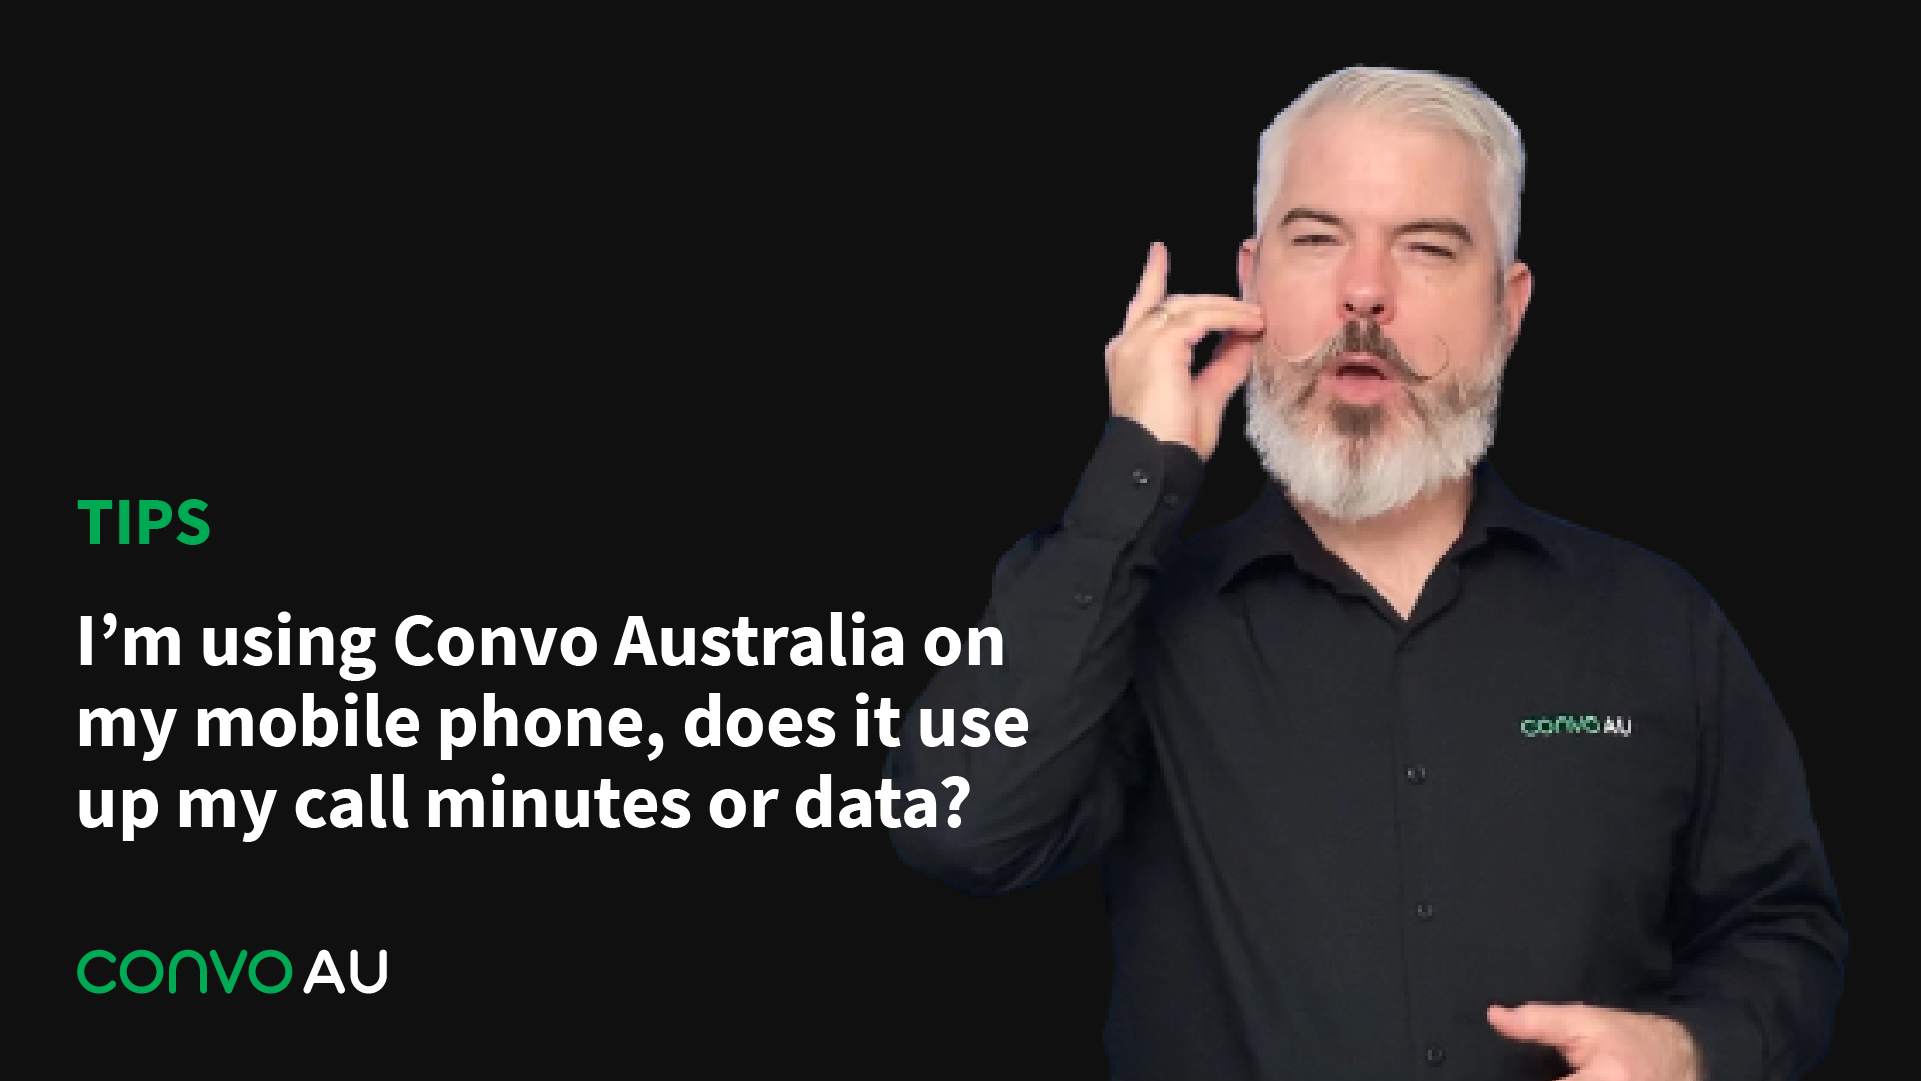 Tips: I'm using Convo Australia on my mobile phone, does it use up my minutes or data?